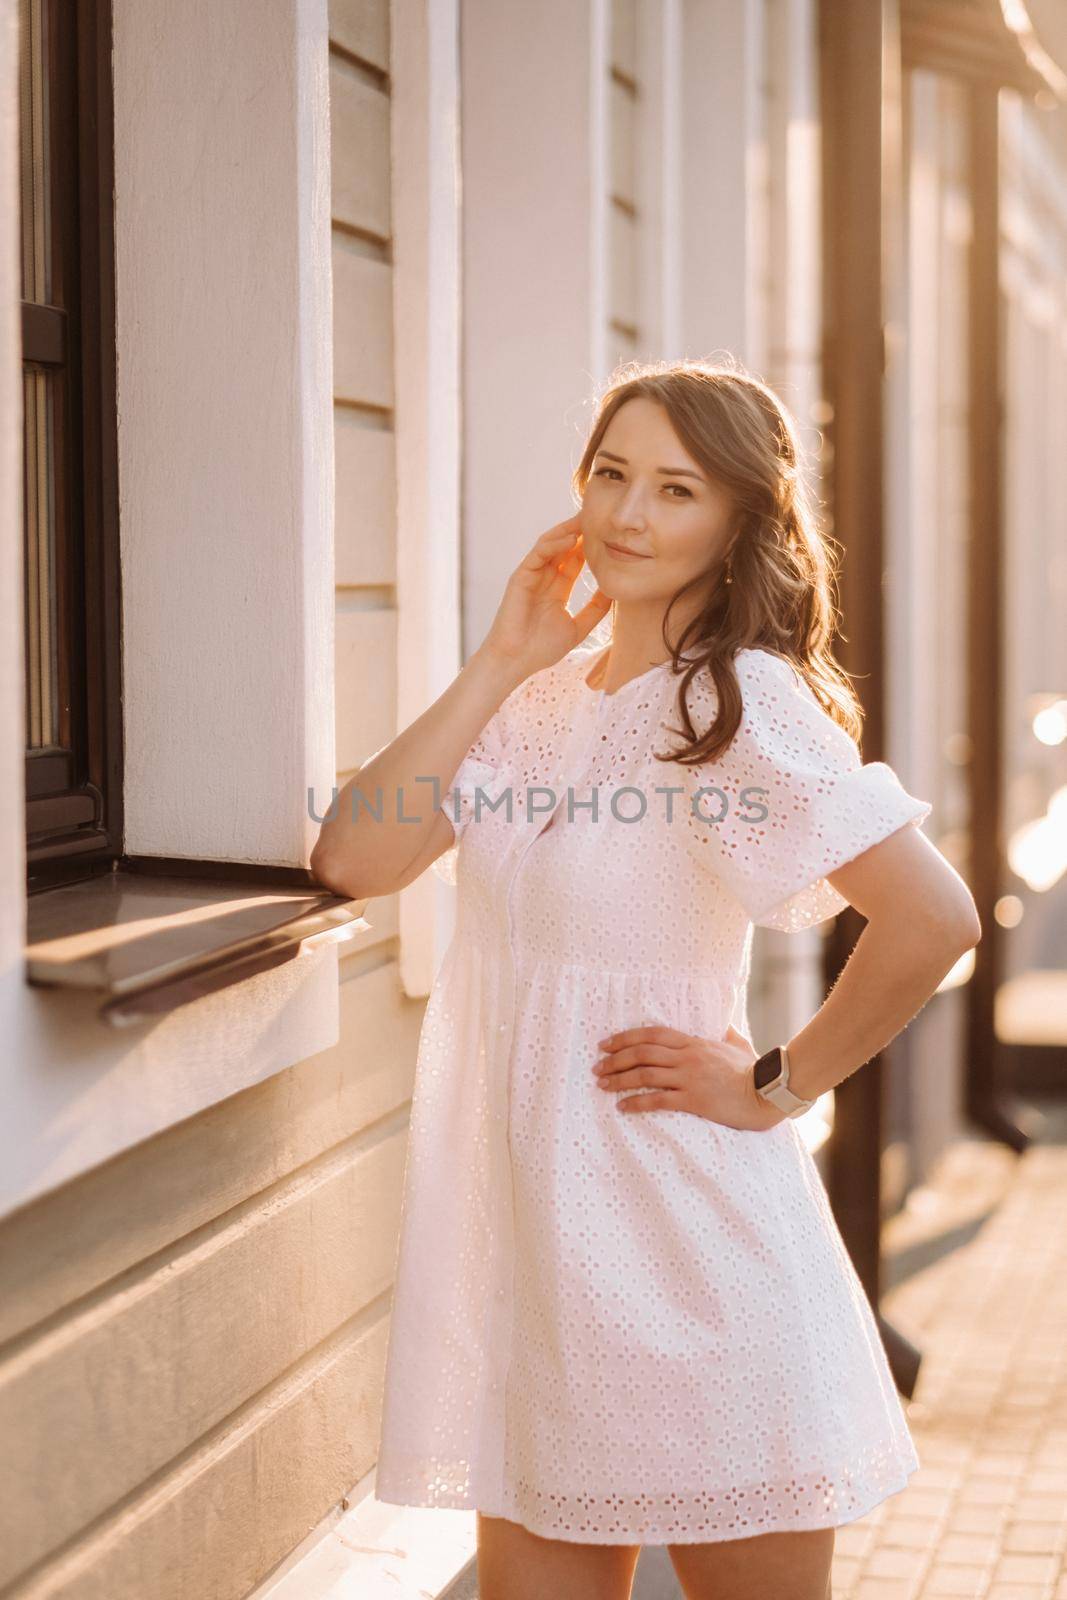 A beautiful woman in a white dress at sunset in the city. Evening street photography by Lobachad